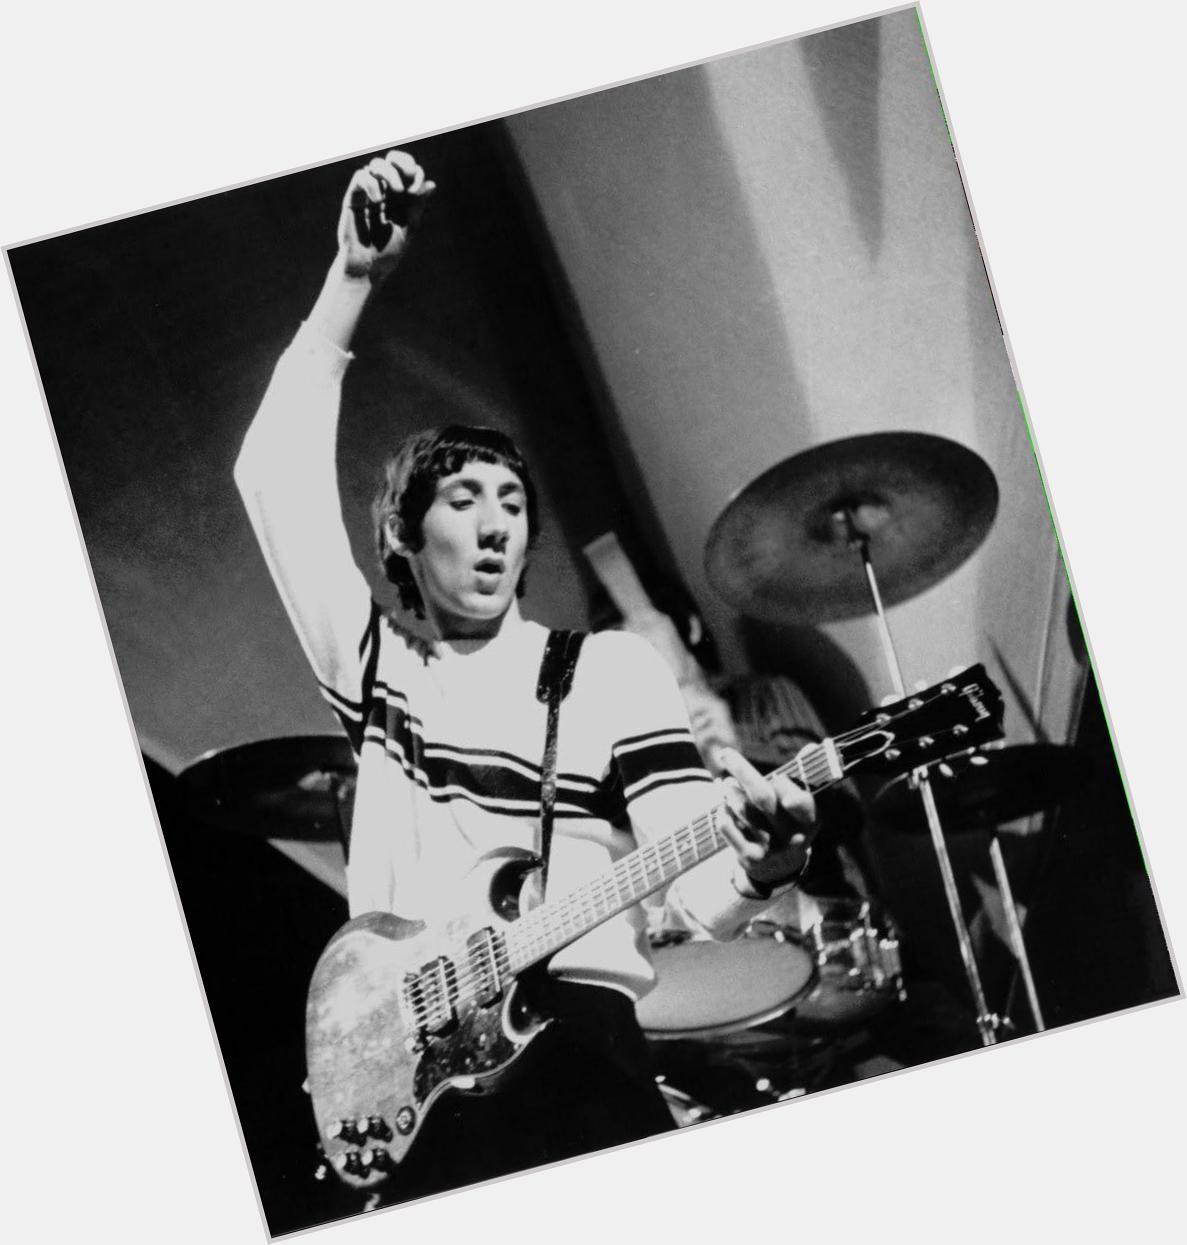 Happy birthday to one of the greatest guitarists, songwriters, and musicians of the 20th century, PETE TOWNSHEND!!! 